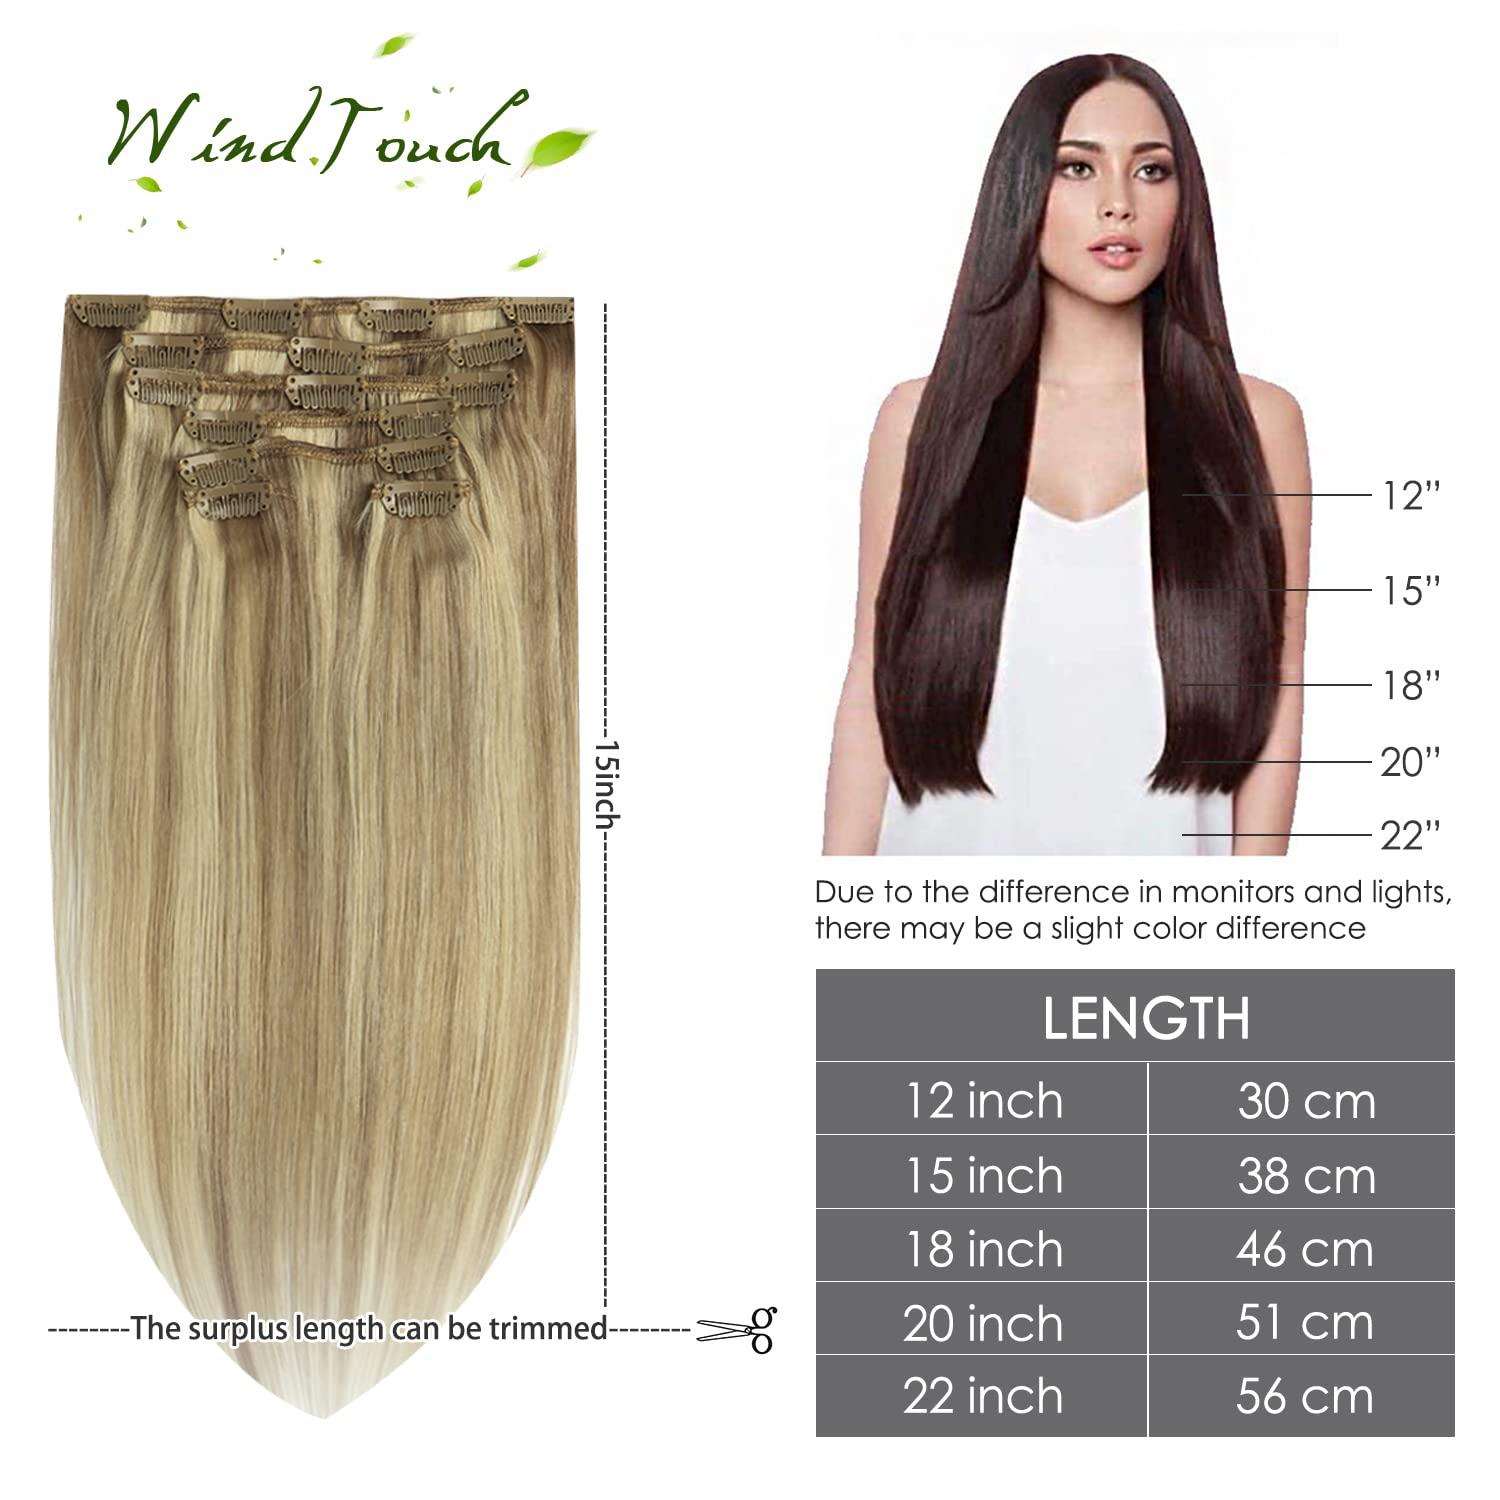 WindTouch Clip in Hair Extensions Human Hair Balayage Mixed Bleach Blonde  15Inch 70g Highlights for Blonde Remy Hair 7PCS #18P613 Gift for Women 15  Inch #18p613 Mixed Bleach Blonde